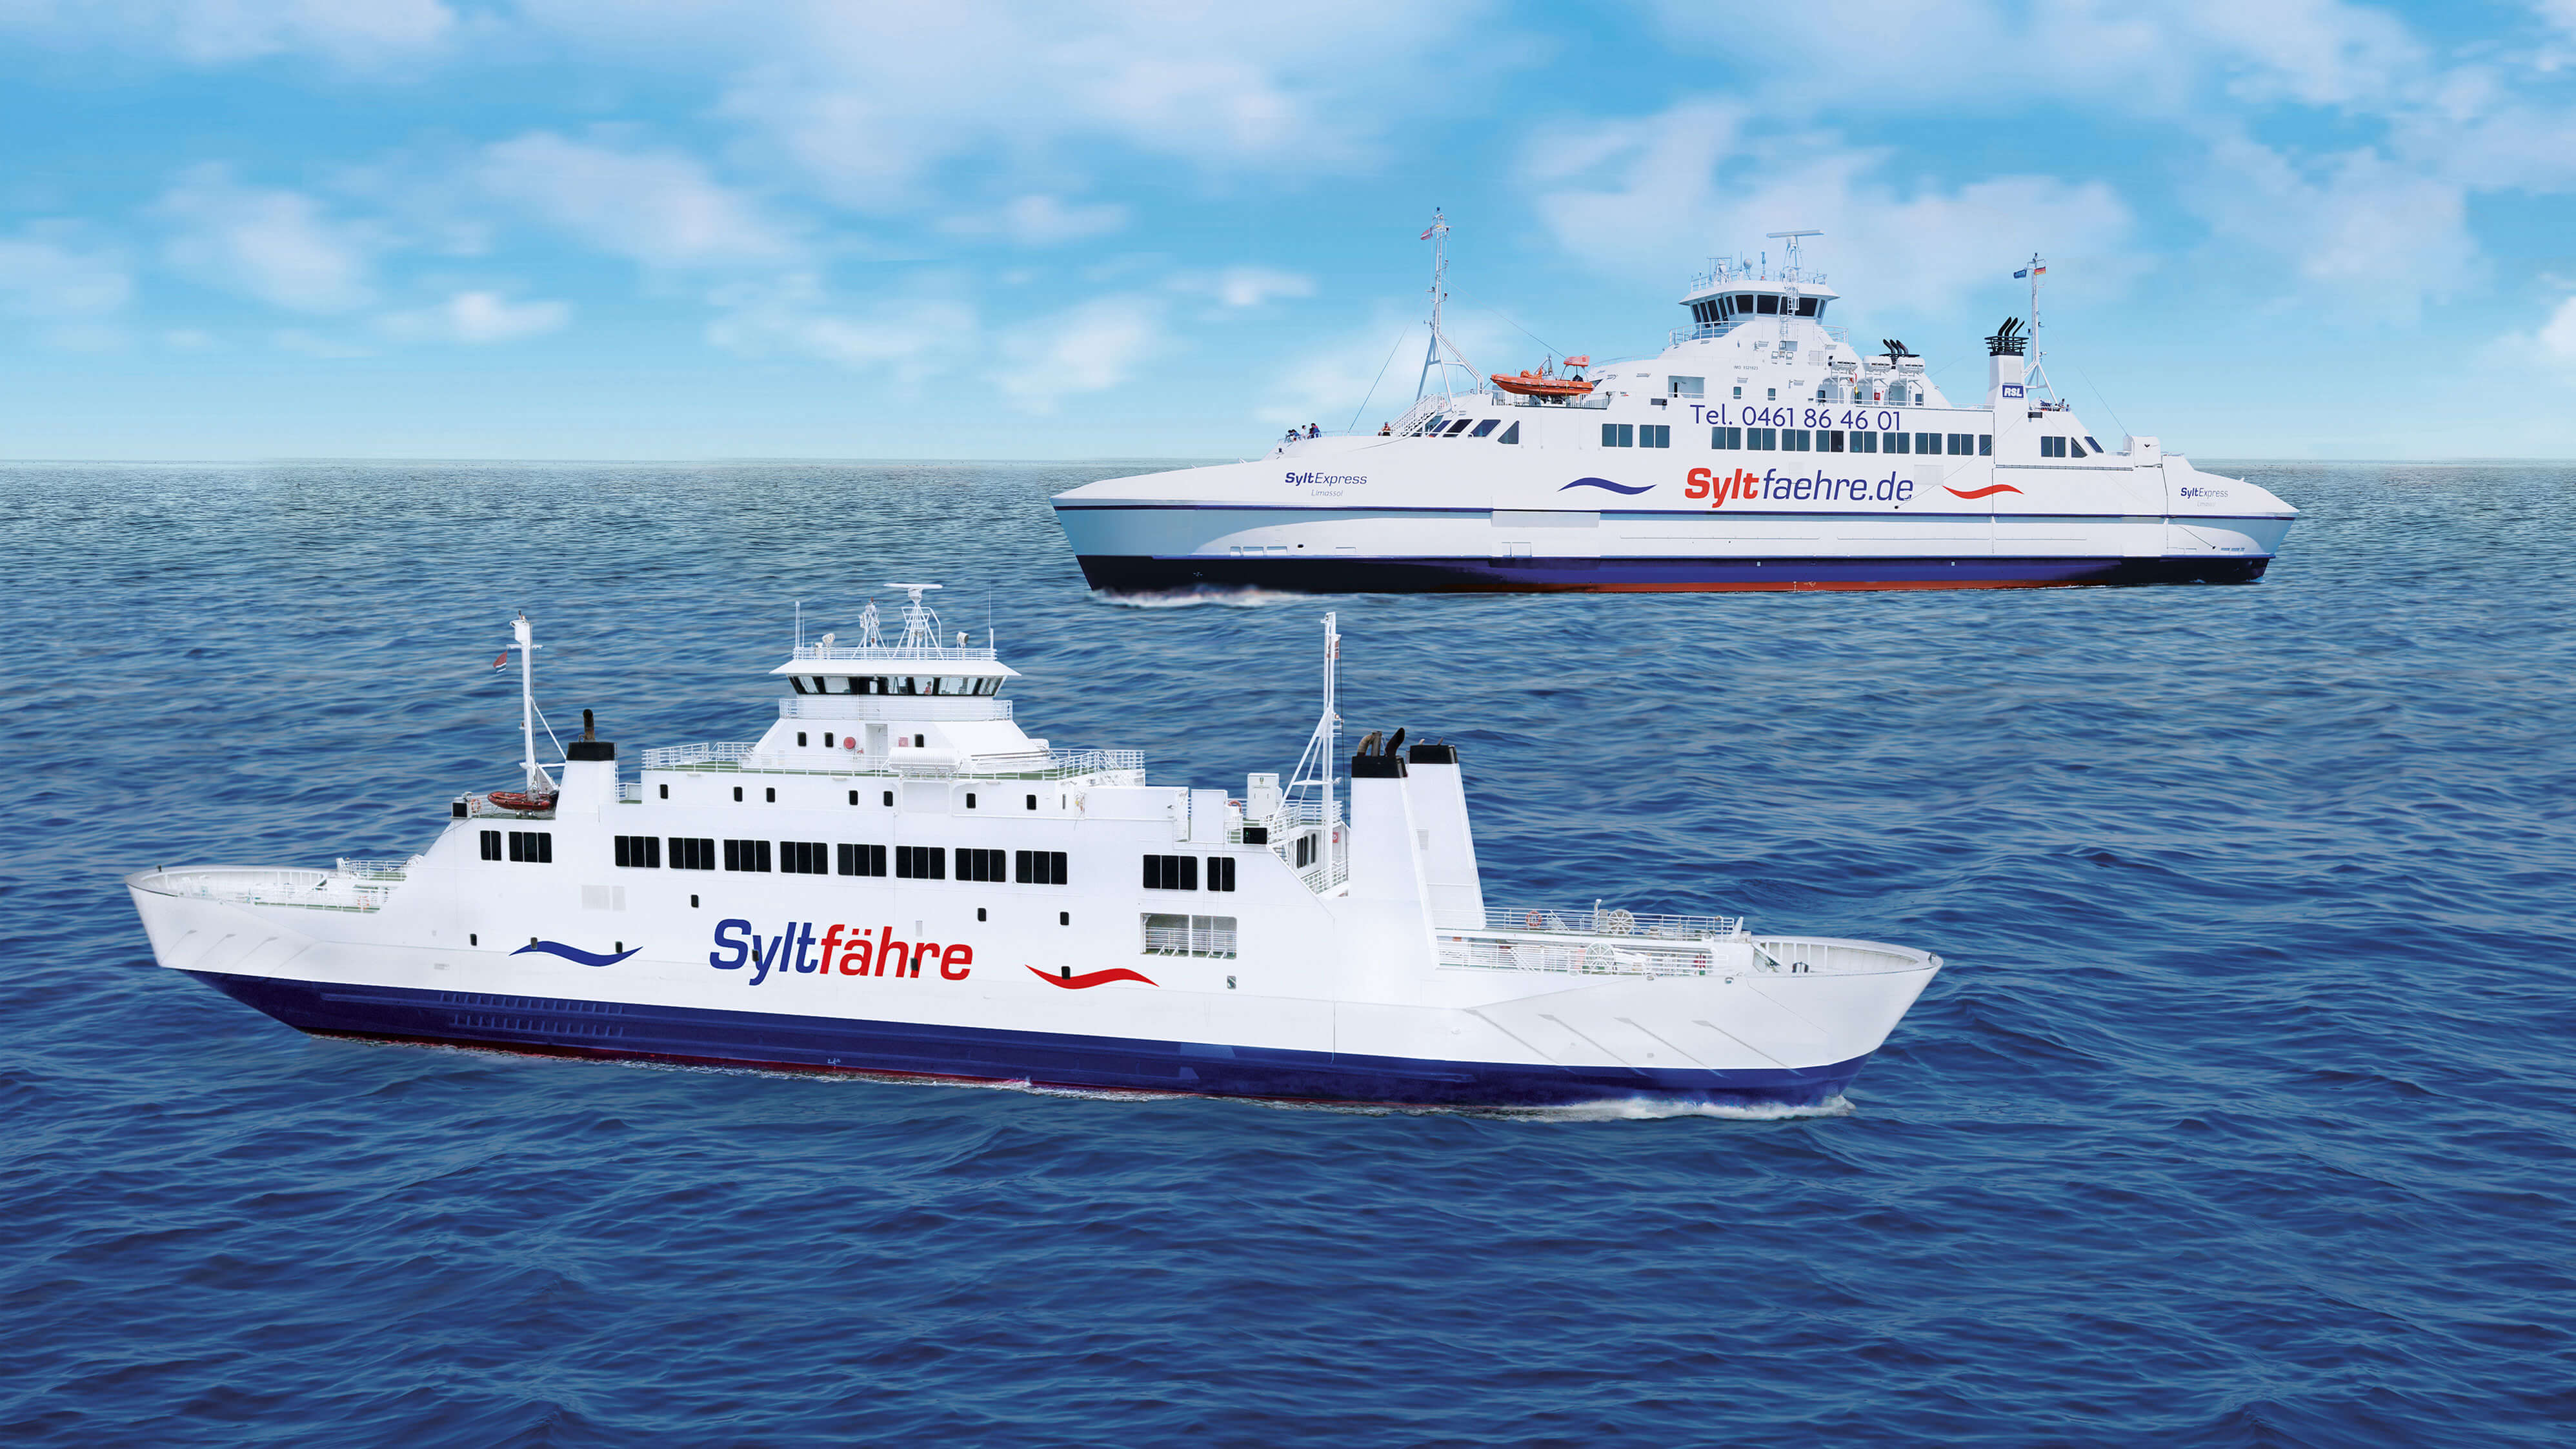 Two Ferries